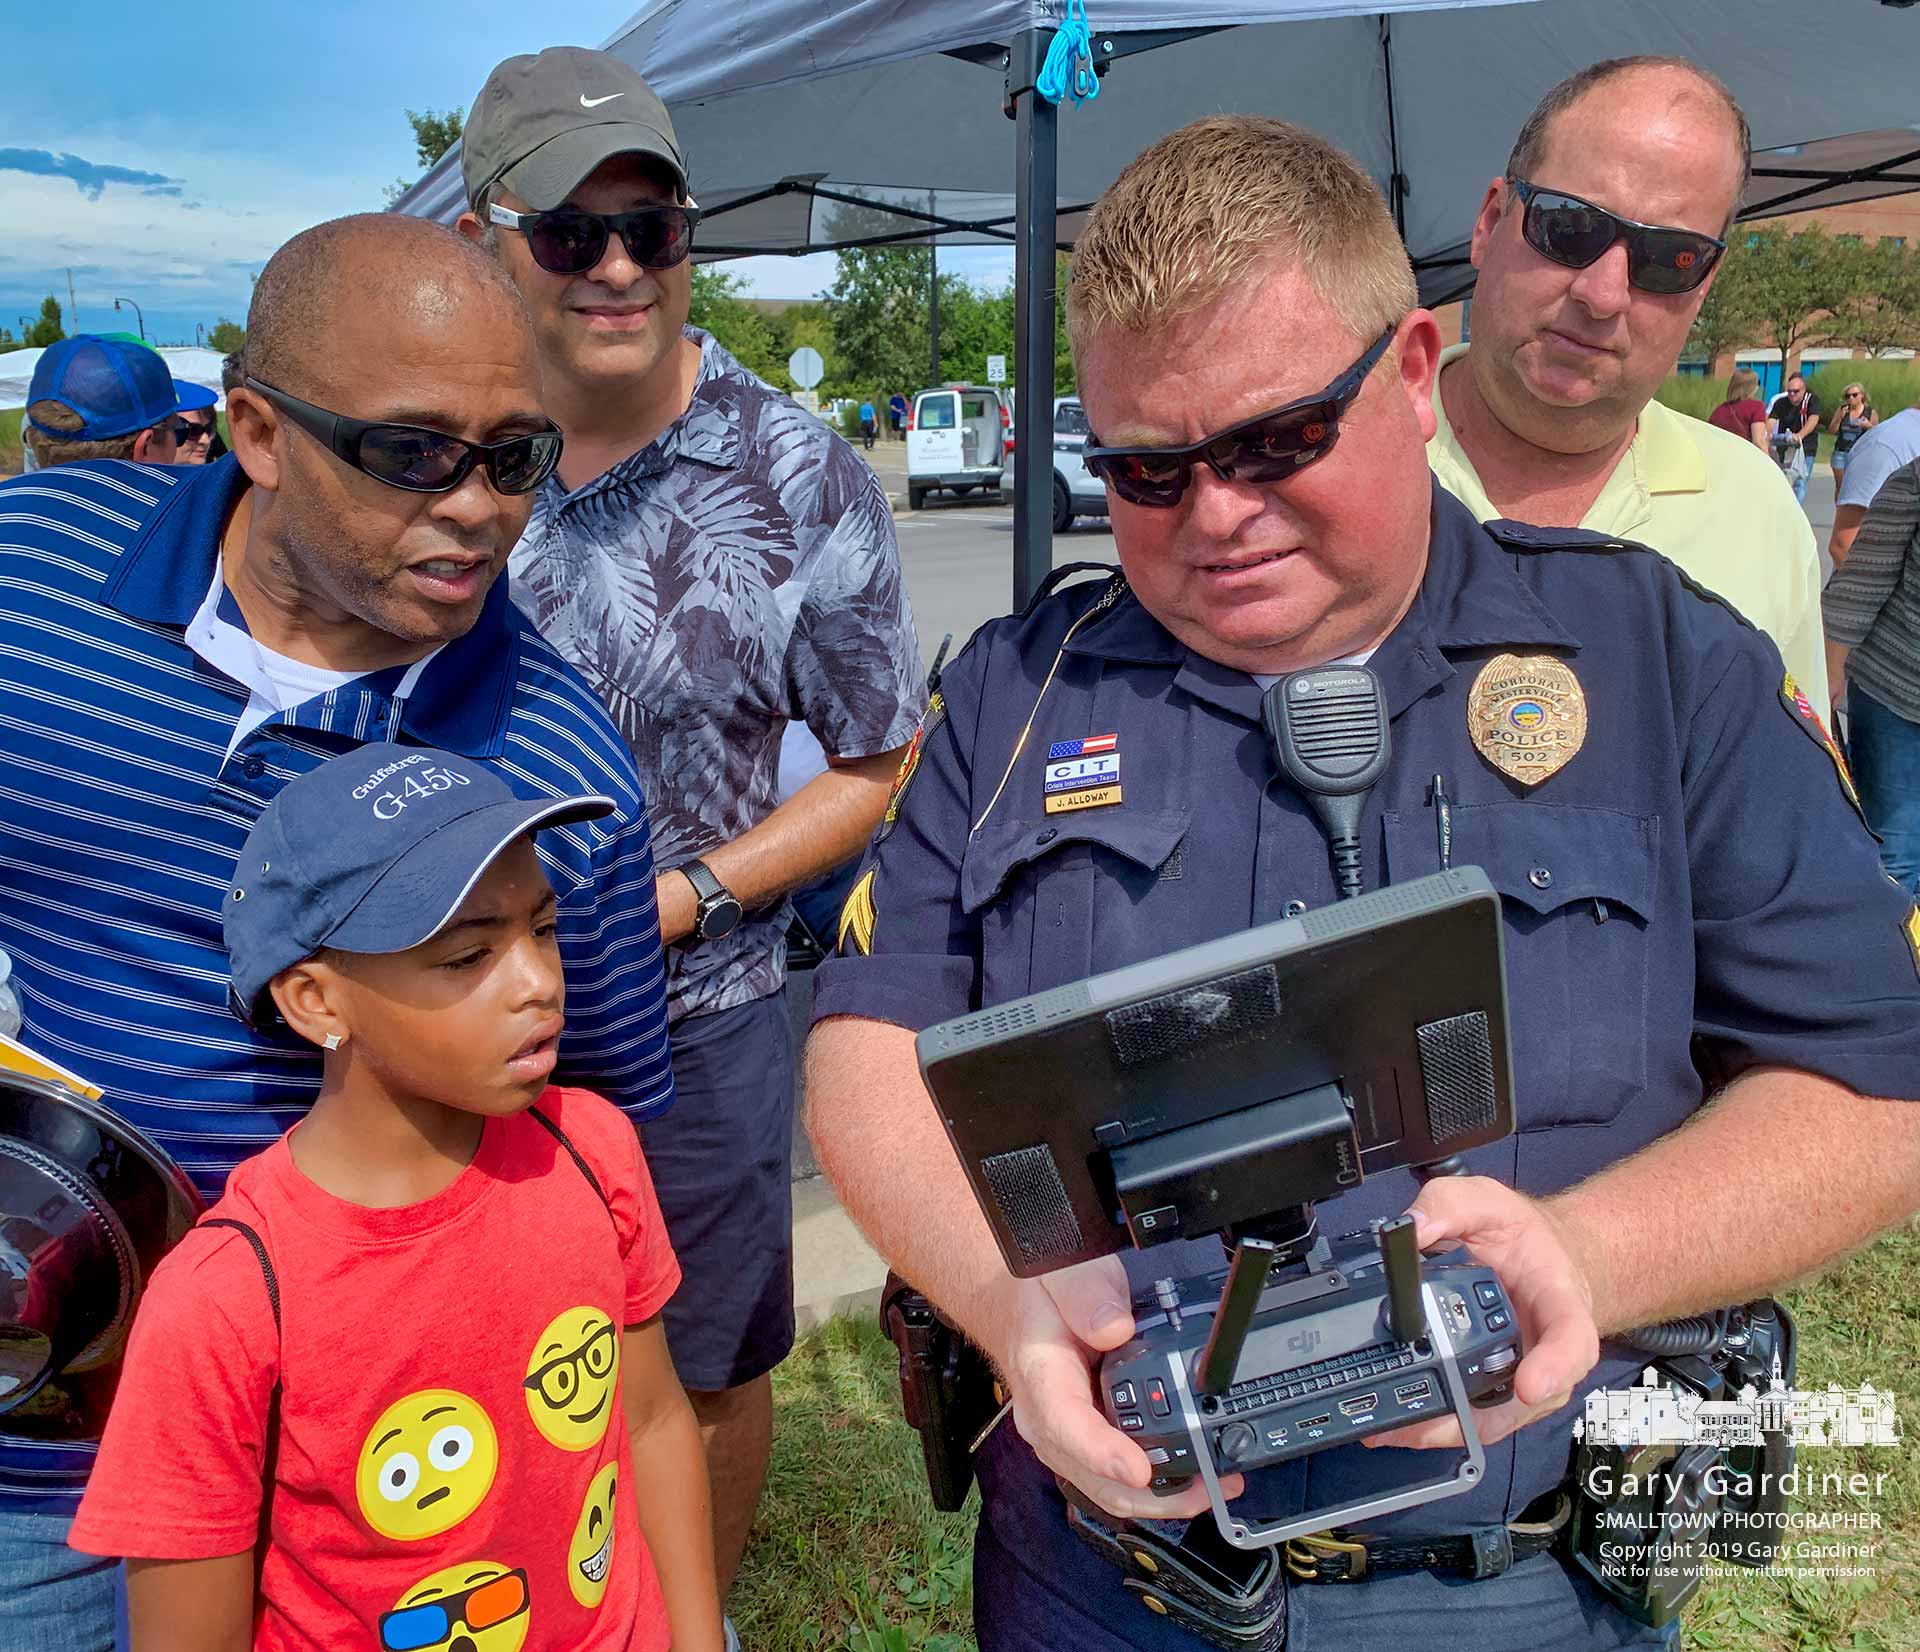 Westerville Police Officer Justin Alloway shows the operation of one of the city's drones during a demonstration at Cops and Kids Day. My Final Photo for Sept. 15, 2019.